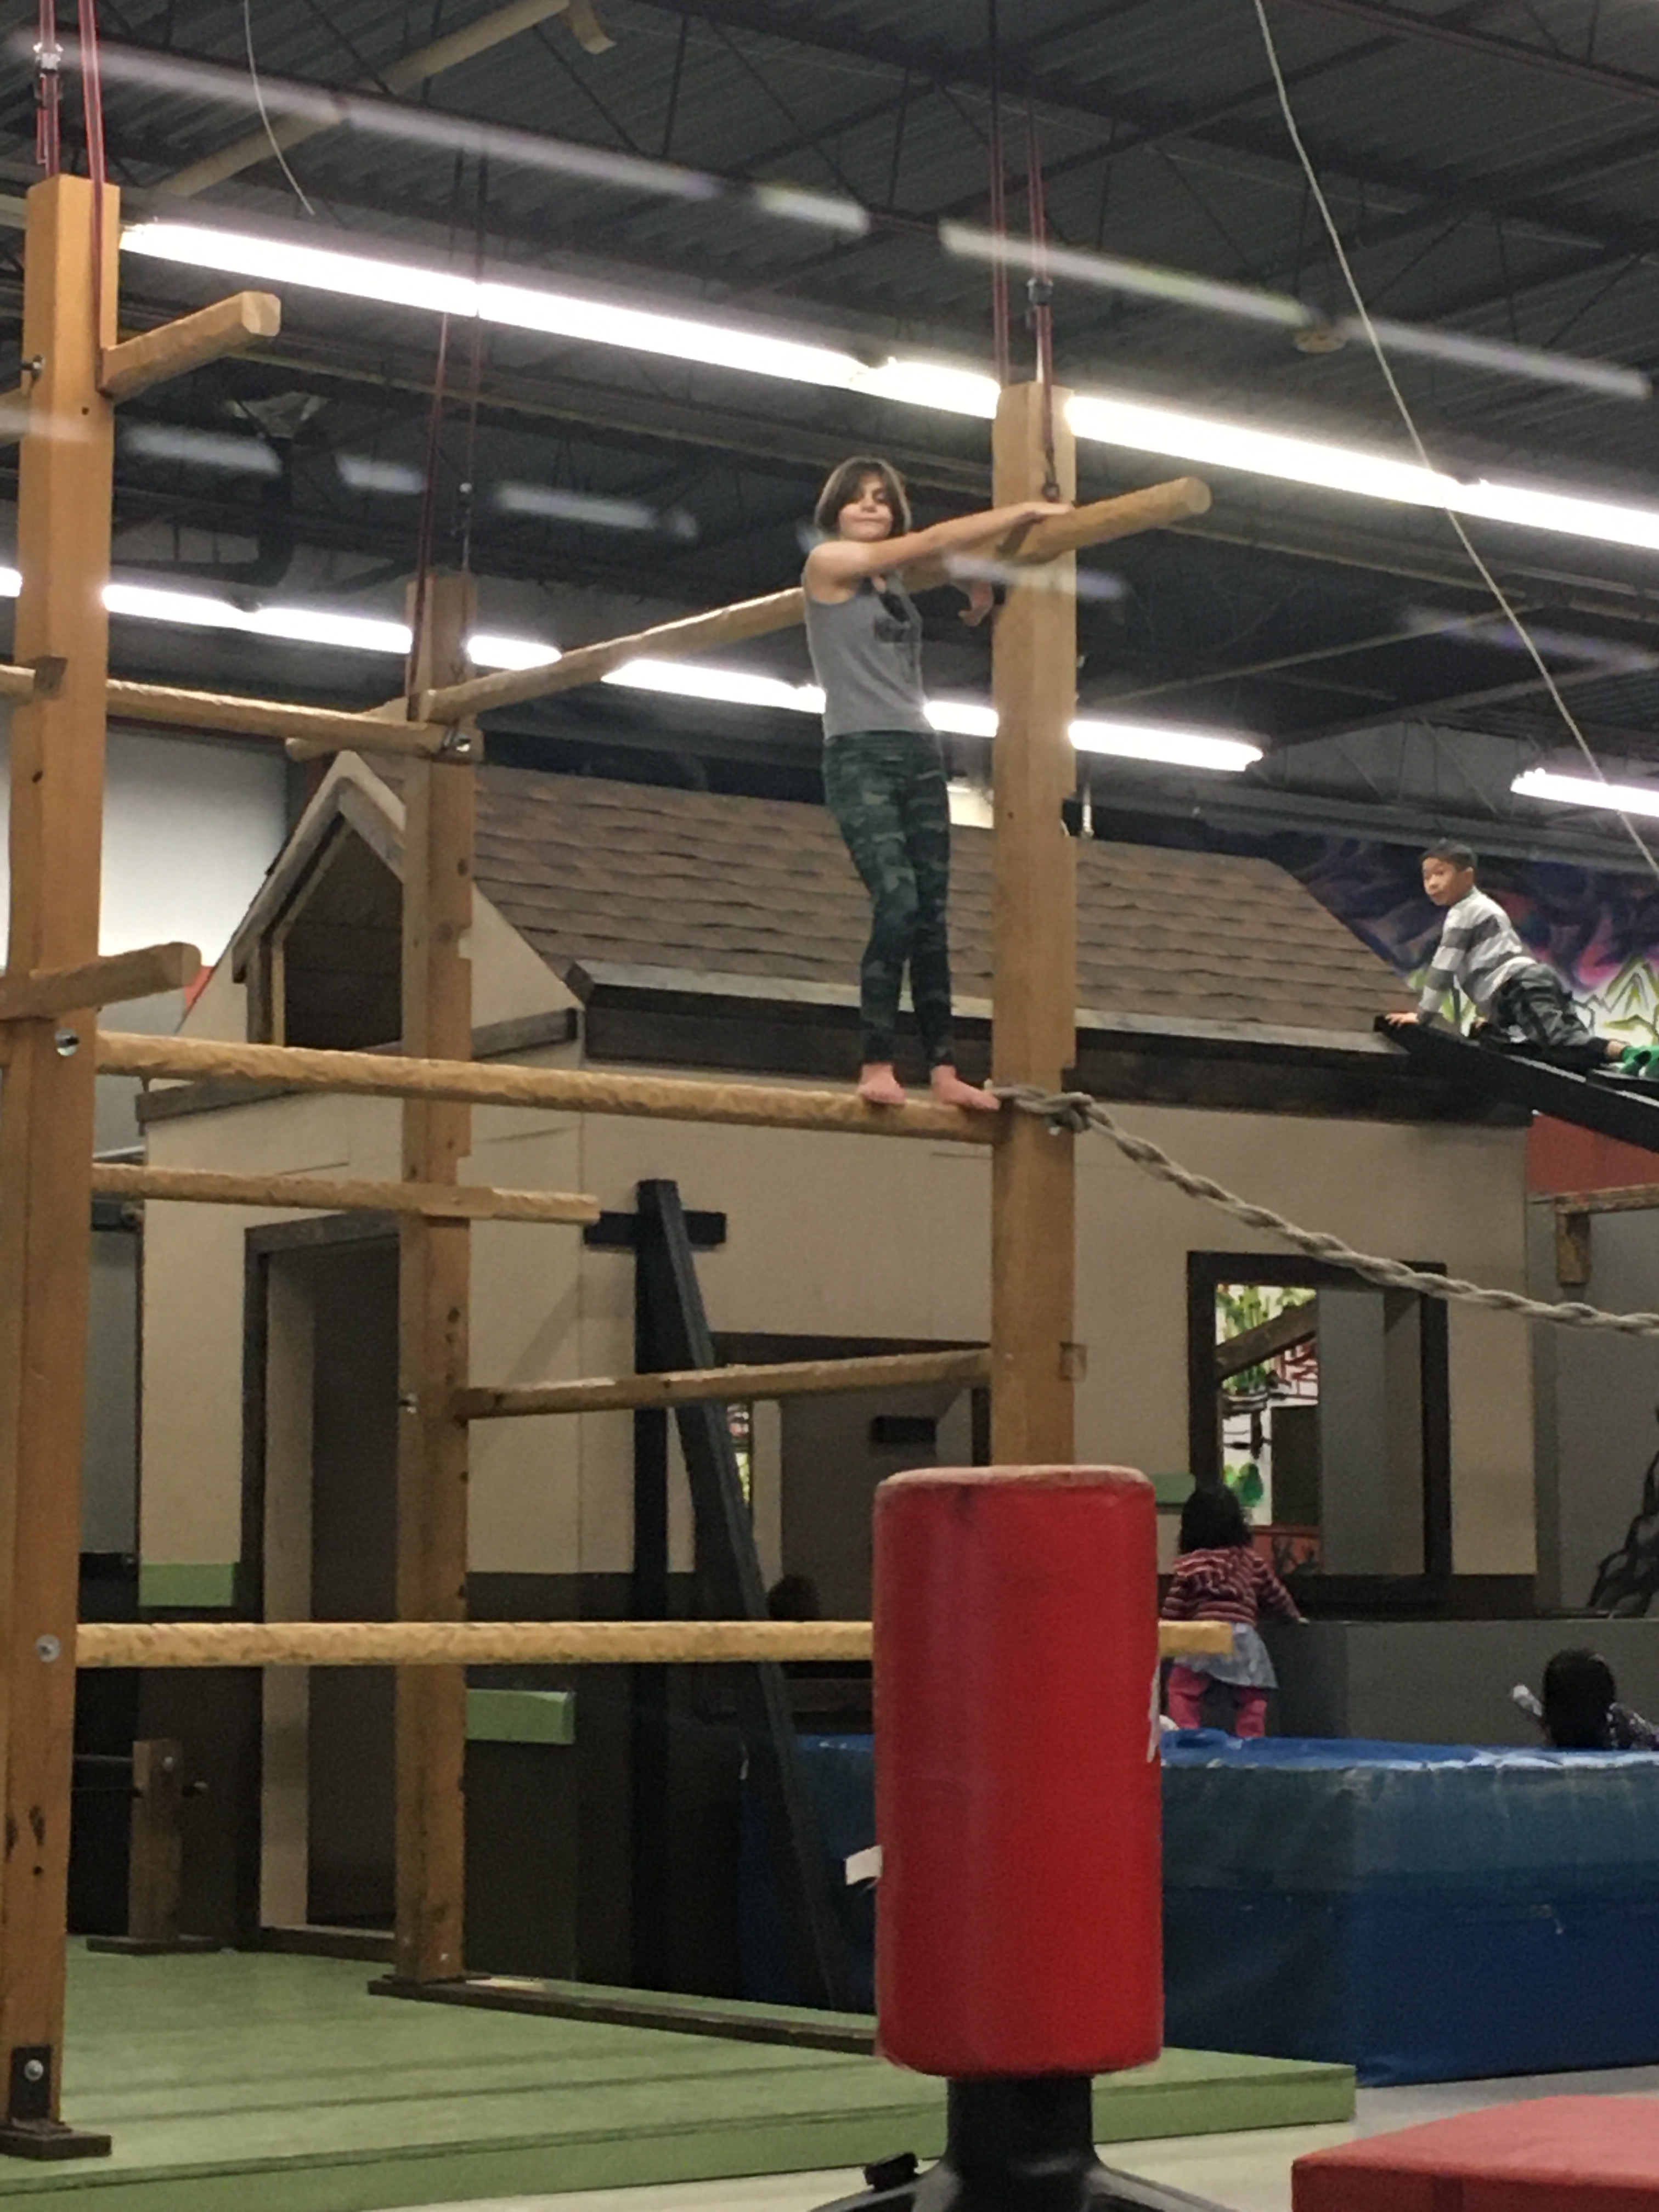 R standing on a wooden beam about nine feet in the air. She's holding onto a nearby post.